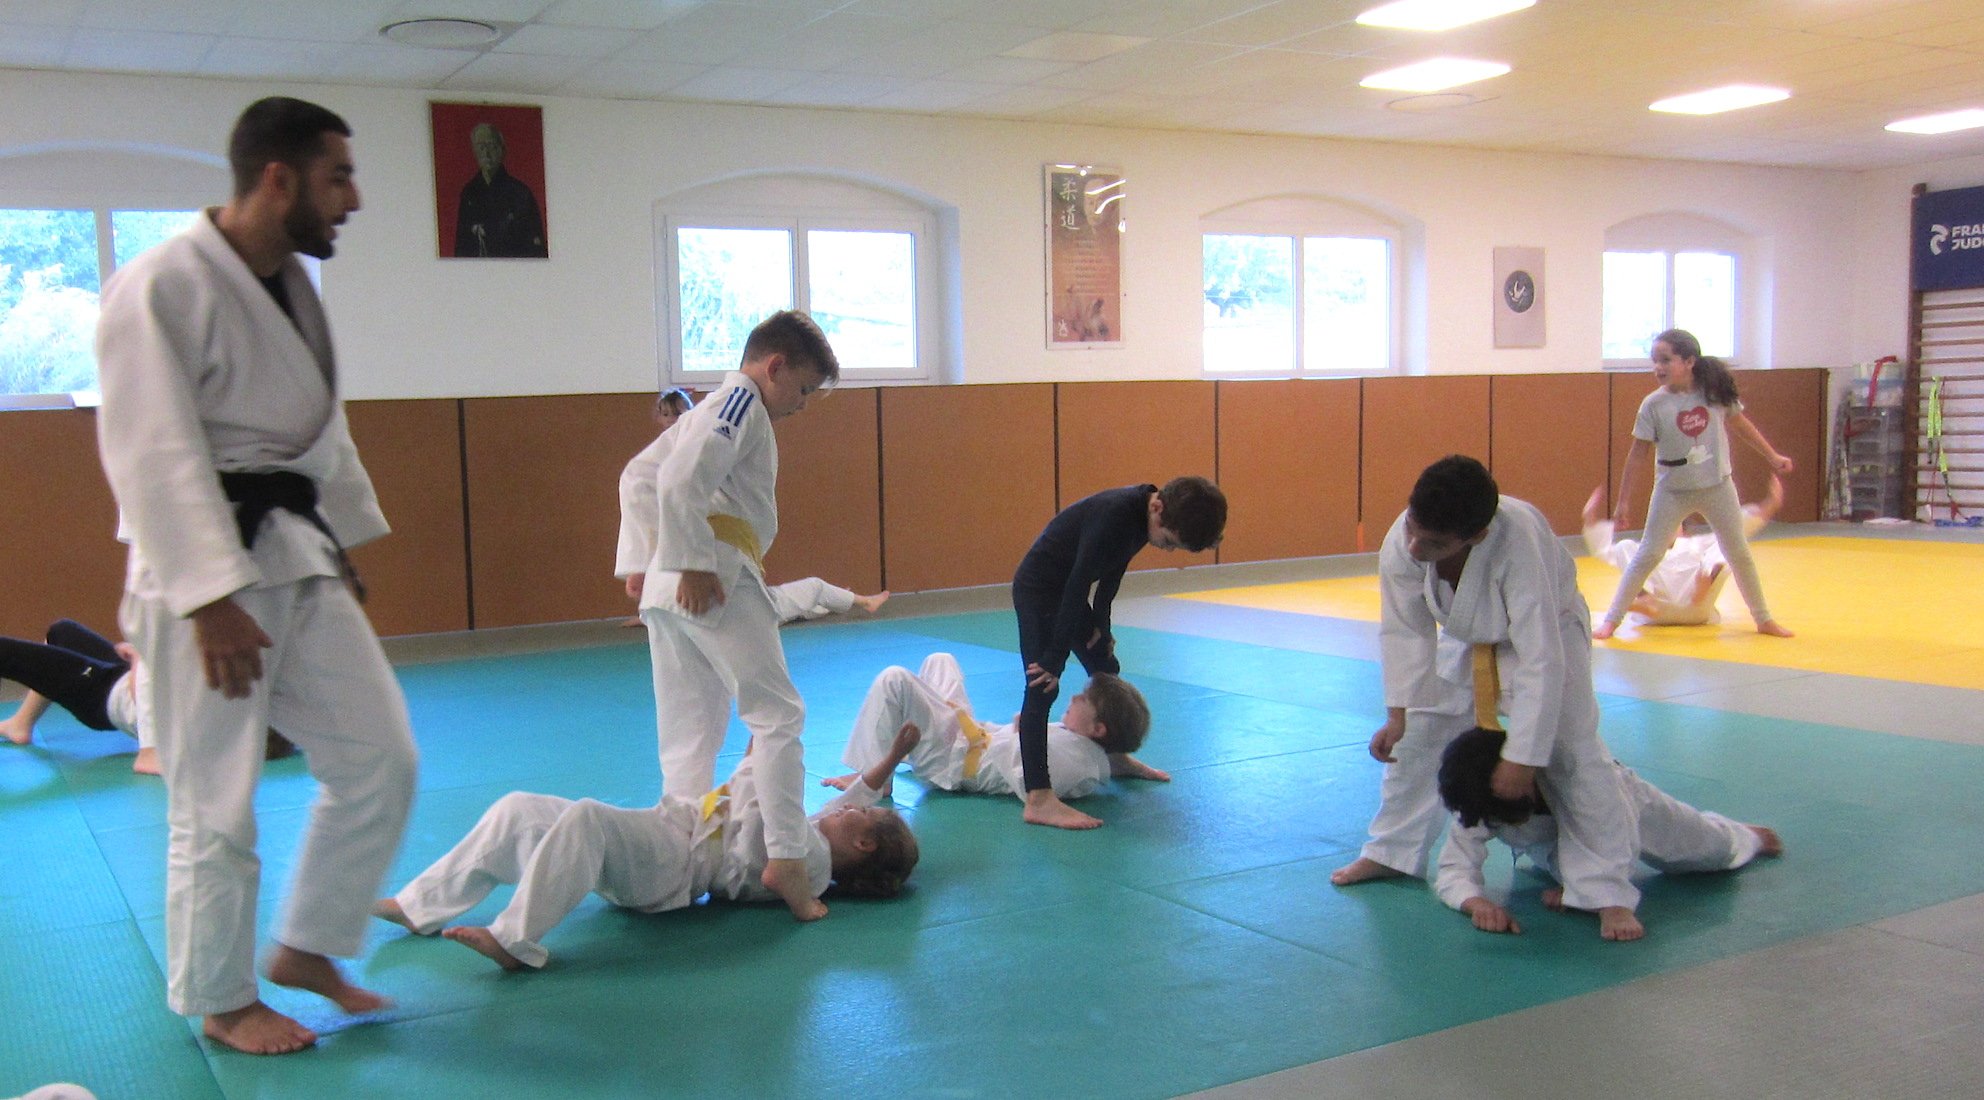 LE CREUSOT: When younger judokas invite their buddies to the tatami